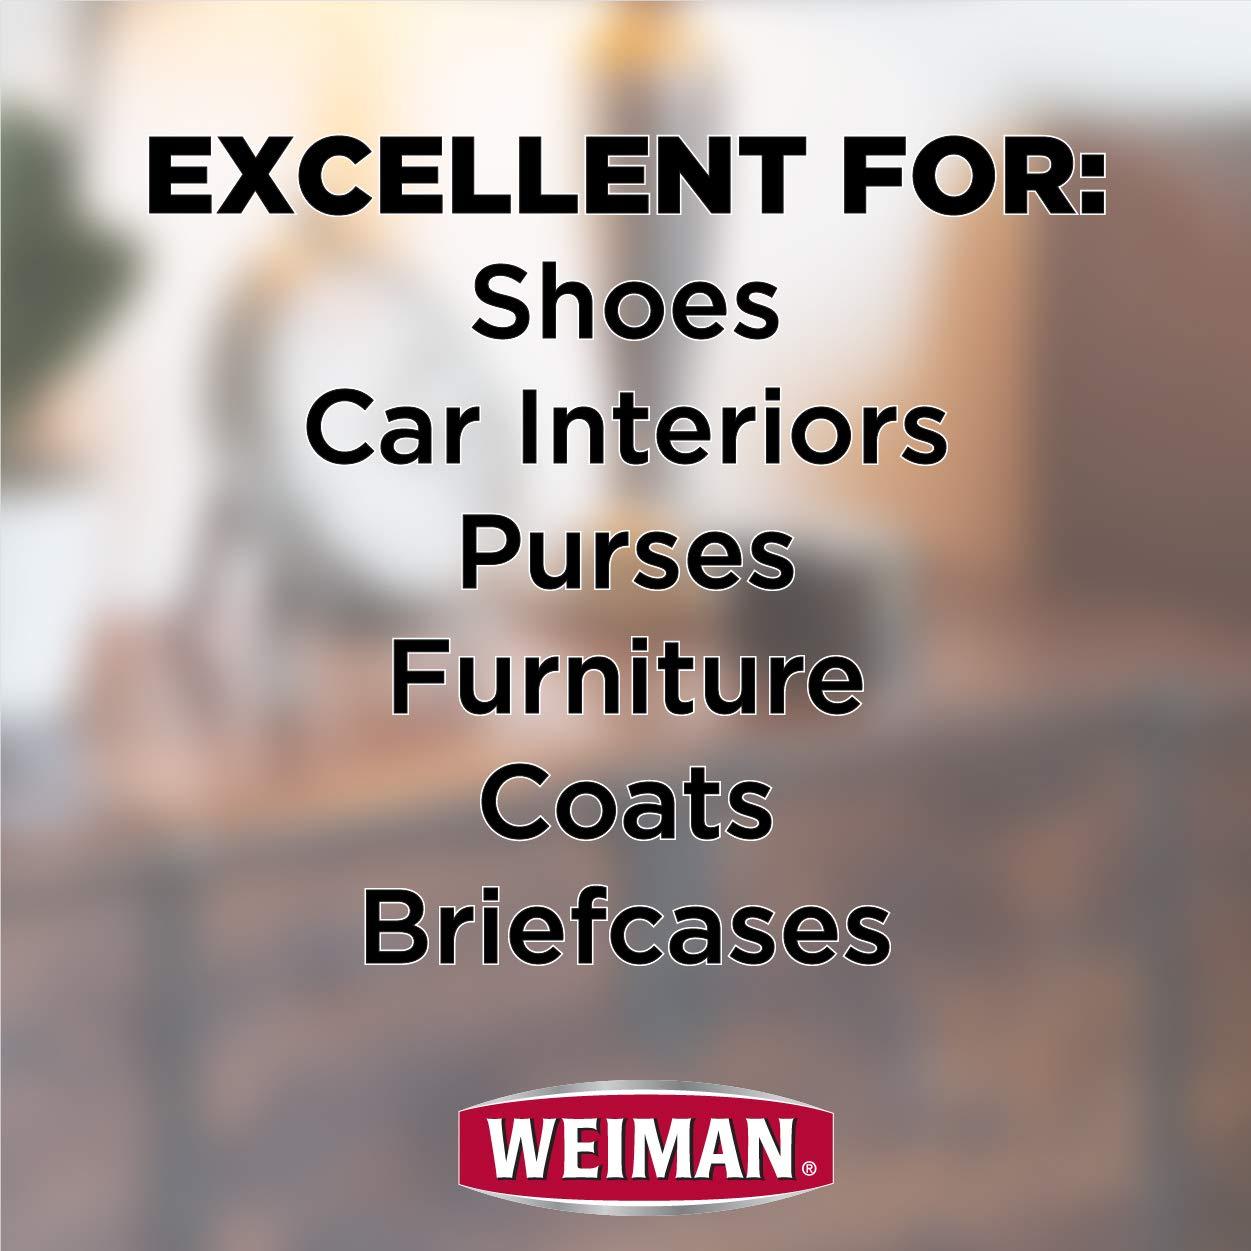 Weiman Leather Wipes - 2 Pack - Clean Condition UV Protection Help Prevent  Cracking or Fading of Leather Furniture, Car Seats & Interior, Shoes and  More 